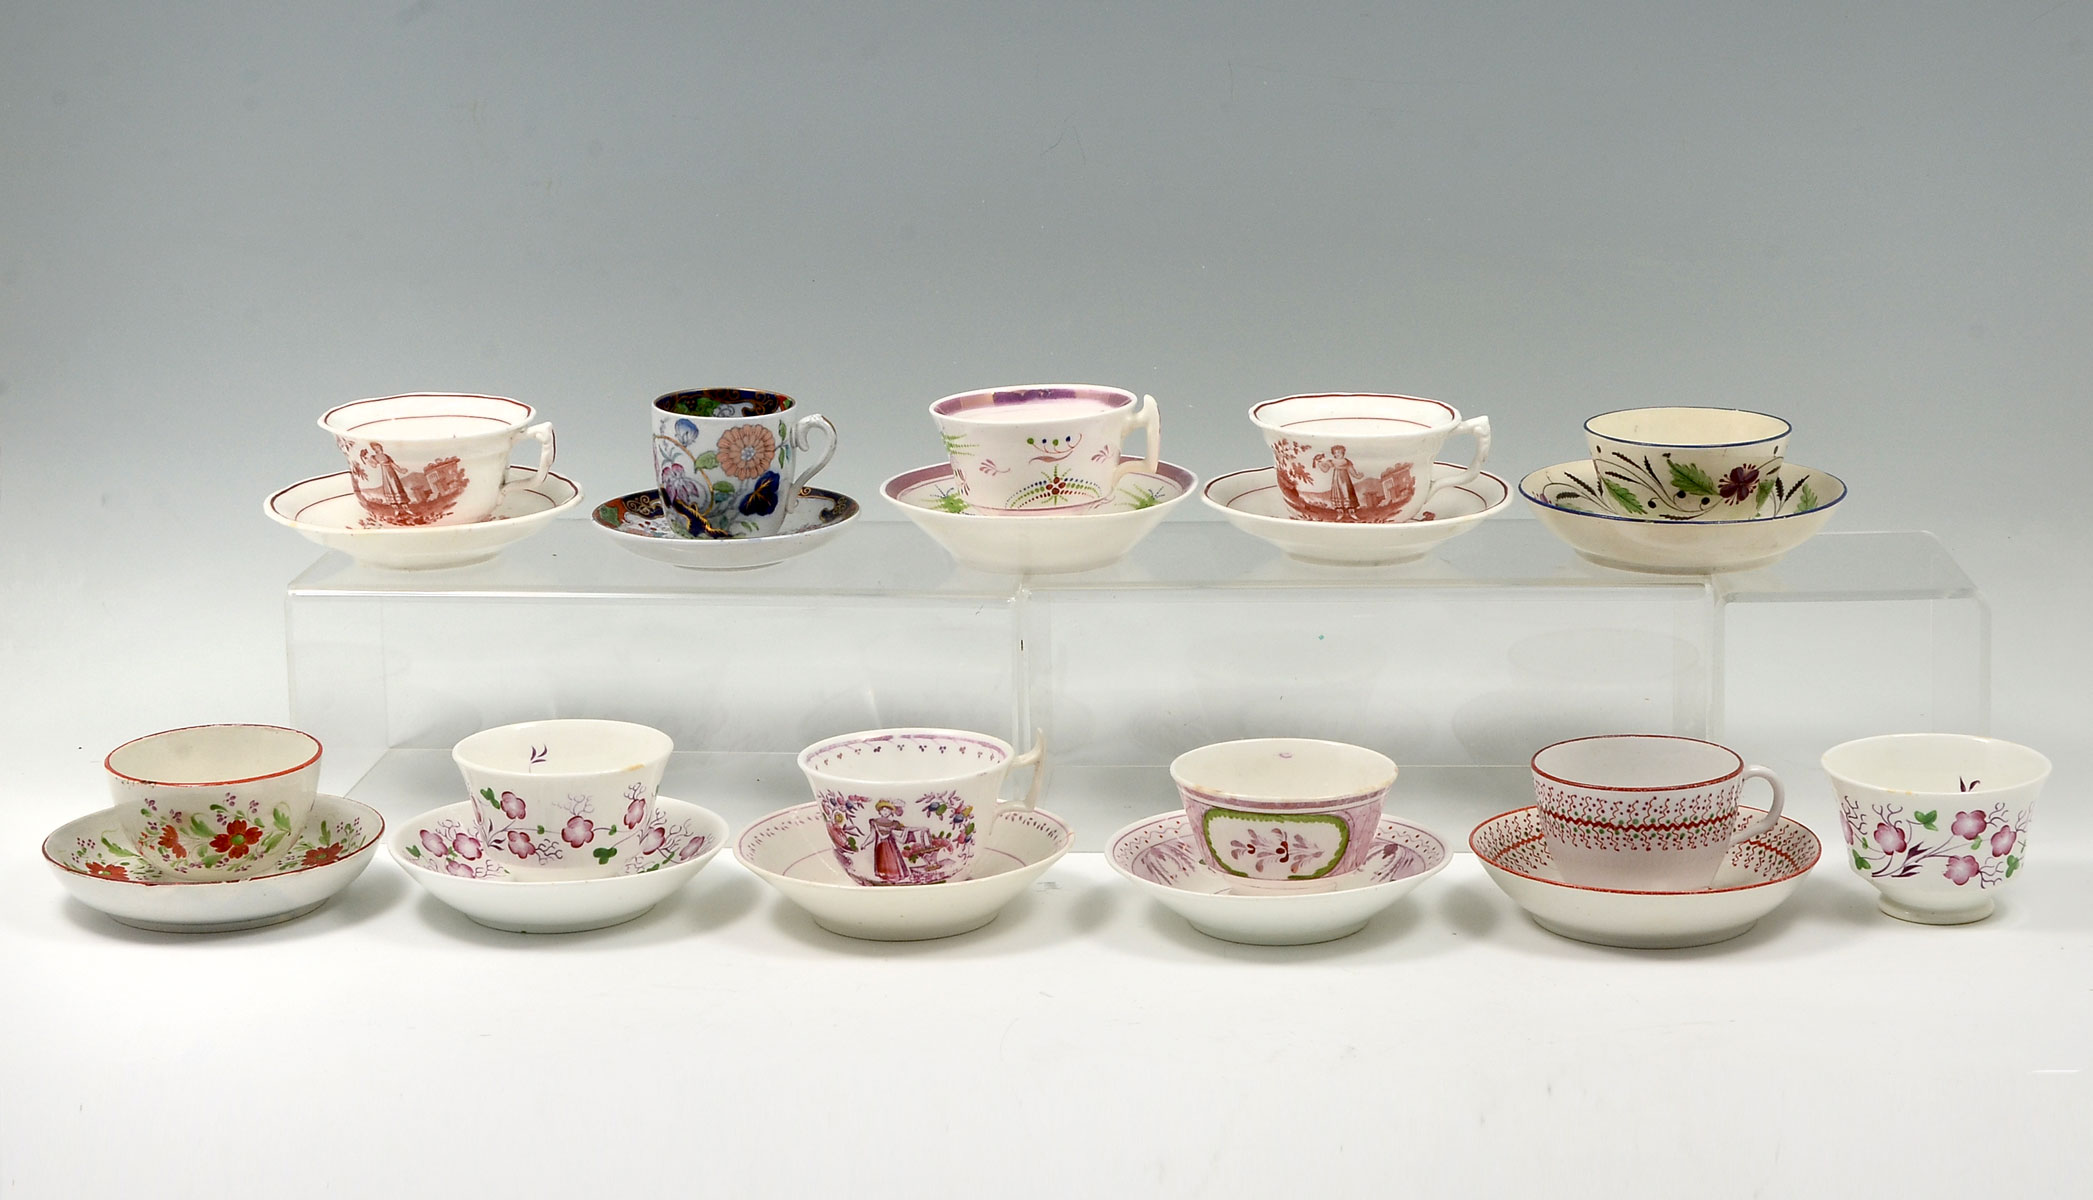 EARLY SOFT PASTE PORCELAIN CUPS & SAUCERS: